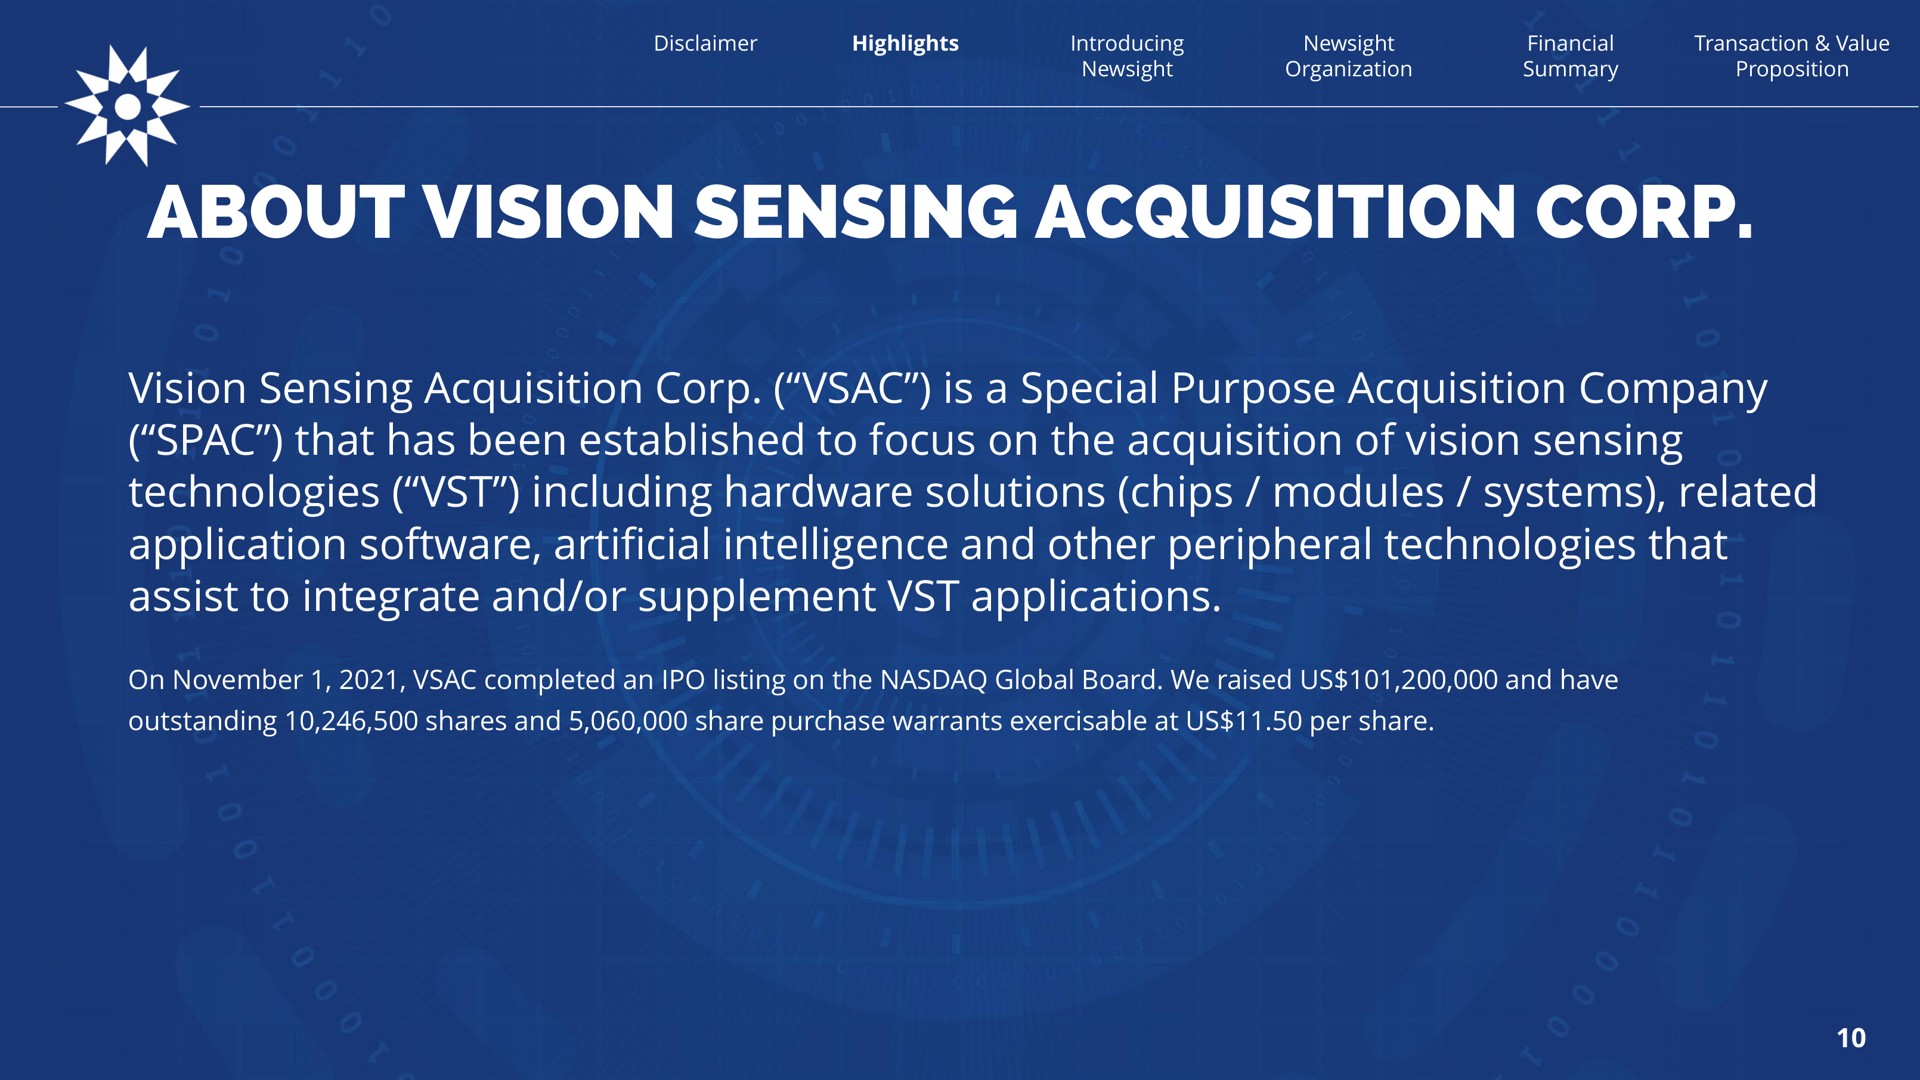 about vision sensing acquisition corp vision sensing acquisition corp is a special purpose acquisition company that has been established to focus on the acquisition of vision sensing technologies including hardware solutions chips modules systems related application artificial intelligence and other peripheral technologies that assist to integrate and or supplement applications on completed an listing on the global board we raised us and have outstanding shares and share purchase warrants exercisable at us per share | Newsight Imaging